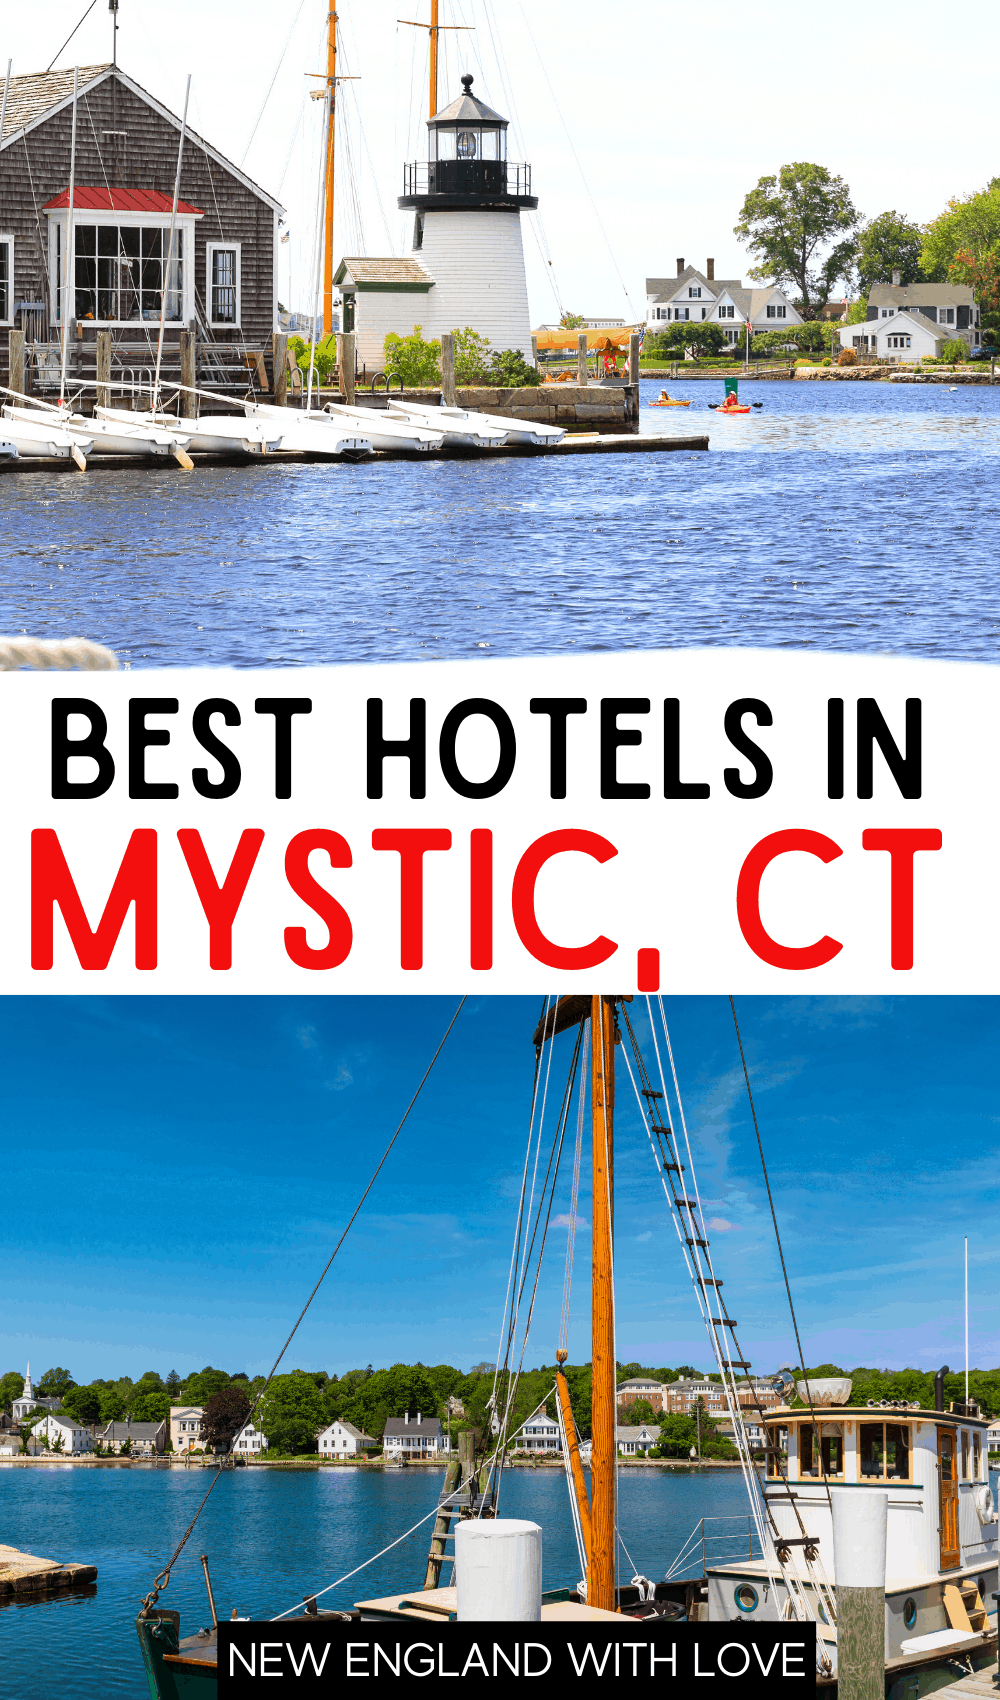 Pinterest graphic reading "BEST HOTELS IN MYSTIC, CT"